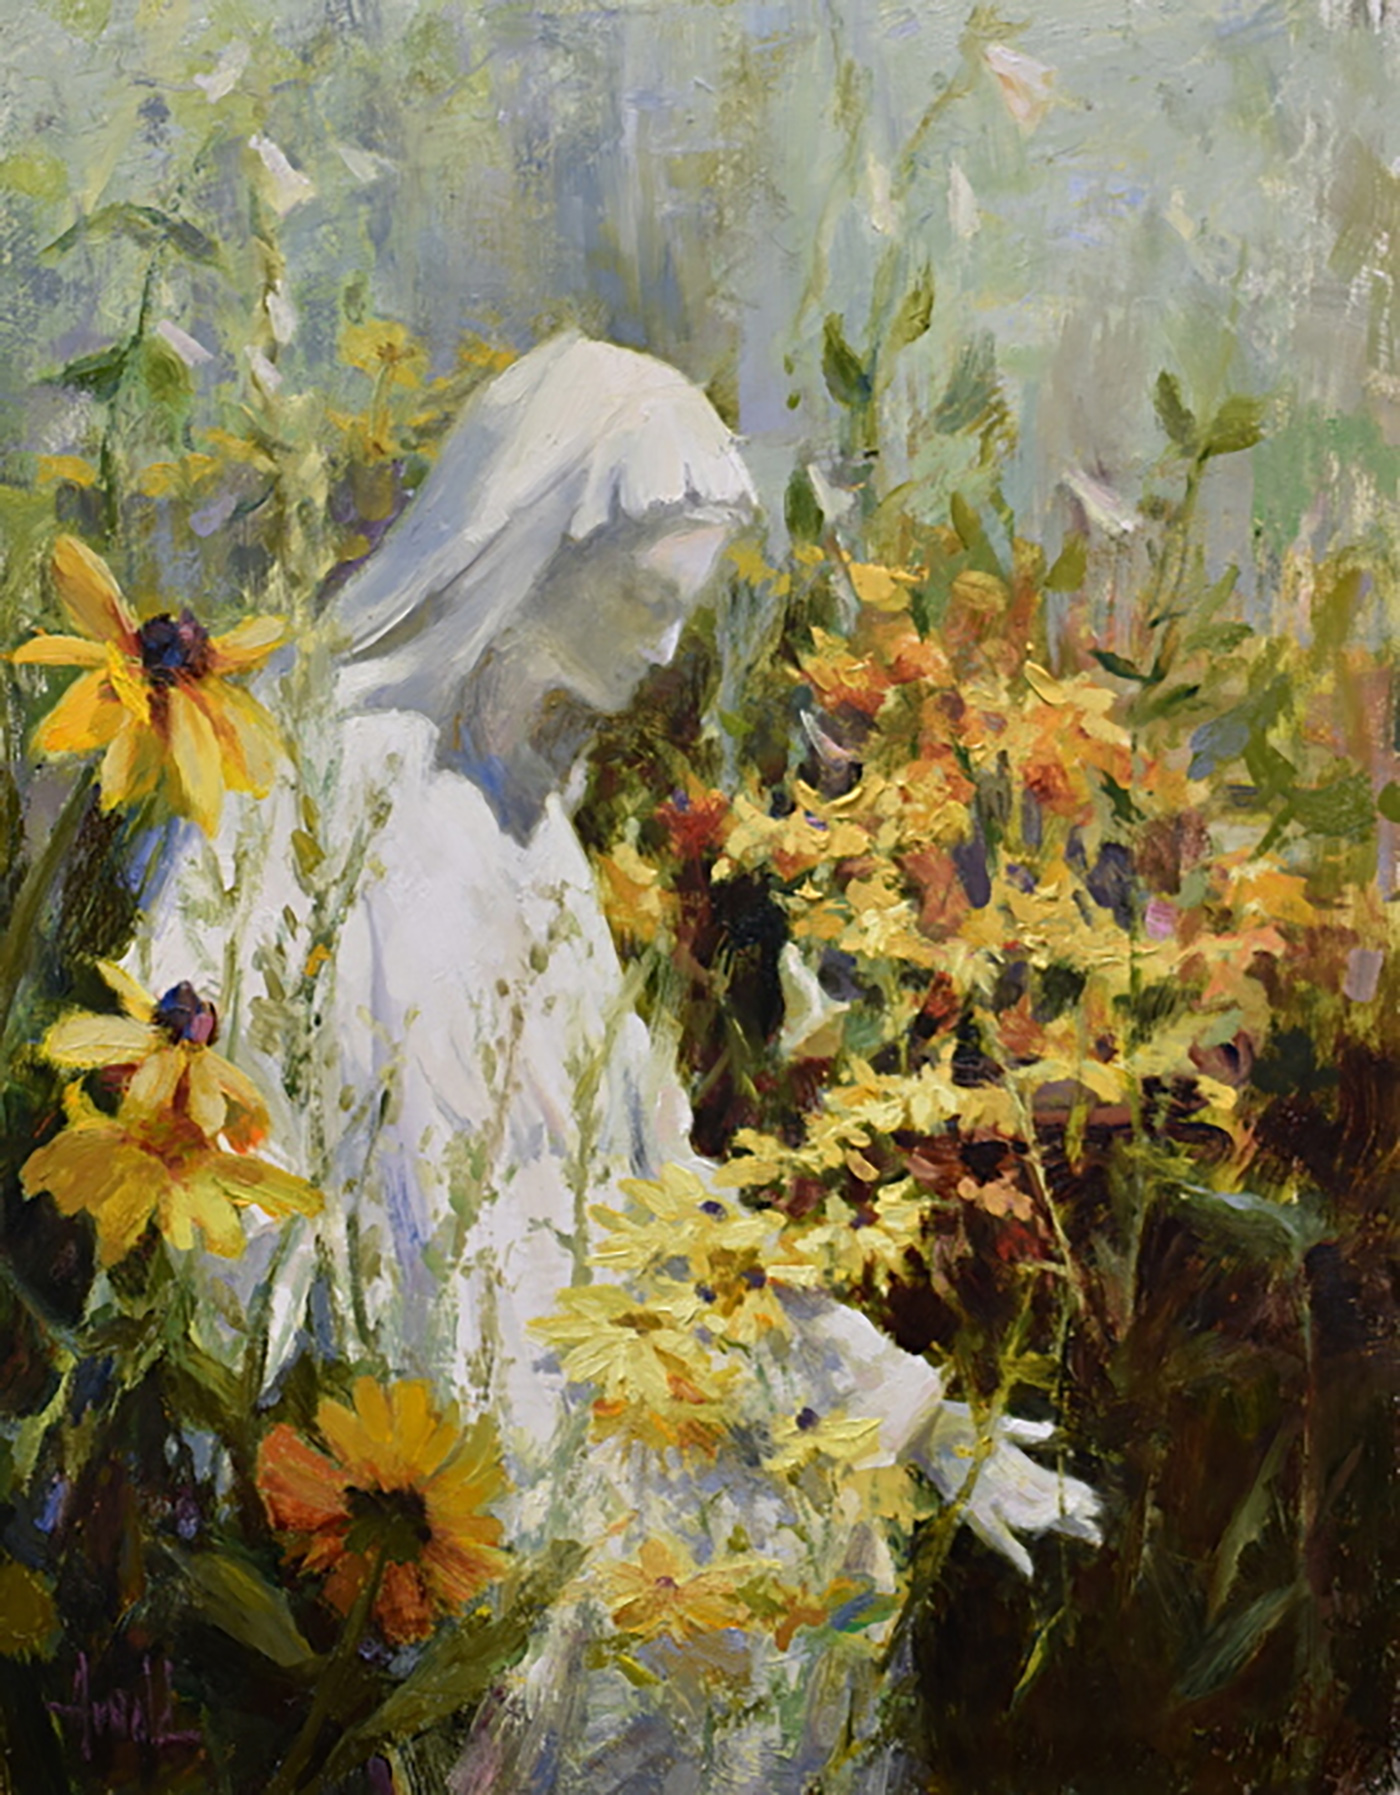 oil painting of a saint statue amongst flowers in a garden